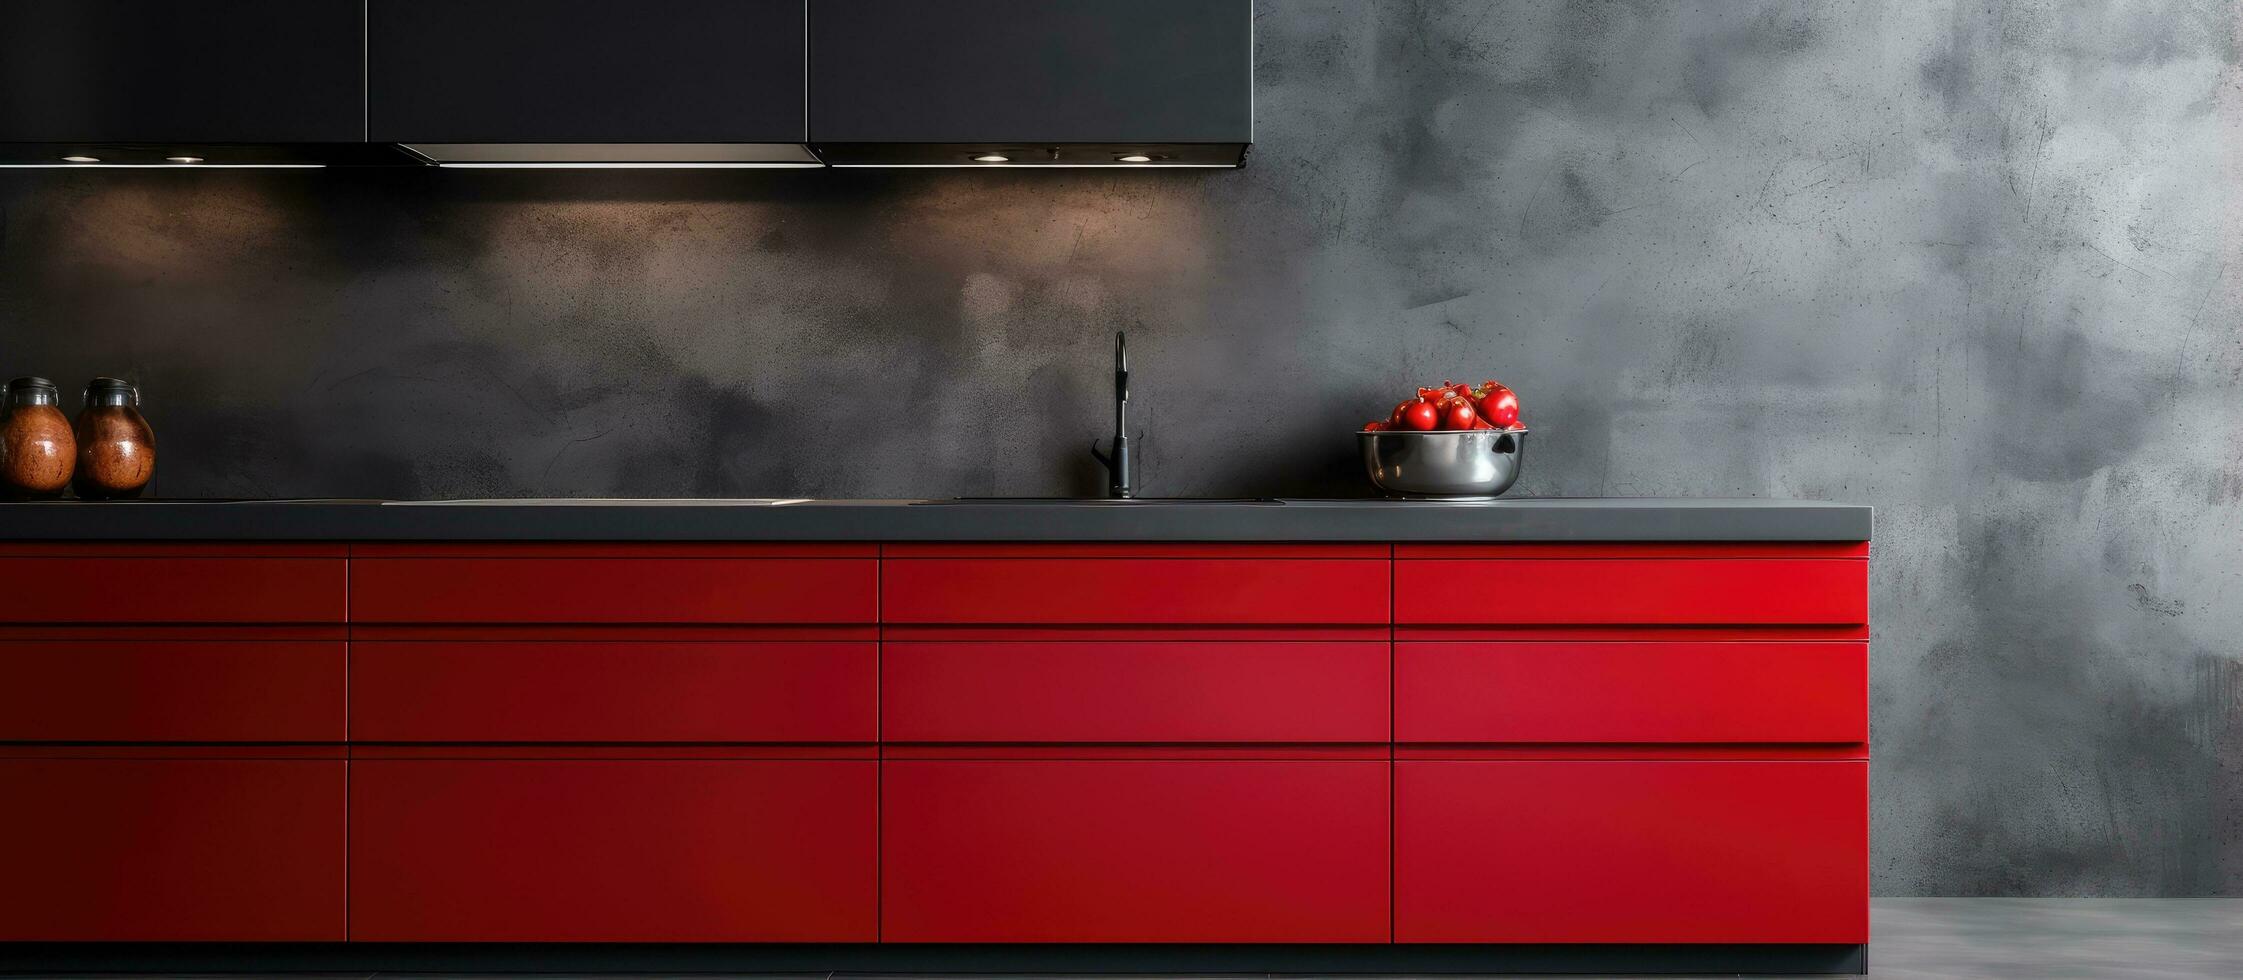 Contemporary kitchen featuring red furniture stainless steel appliances and black slate floors photo